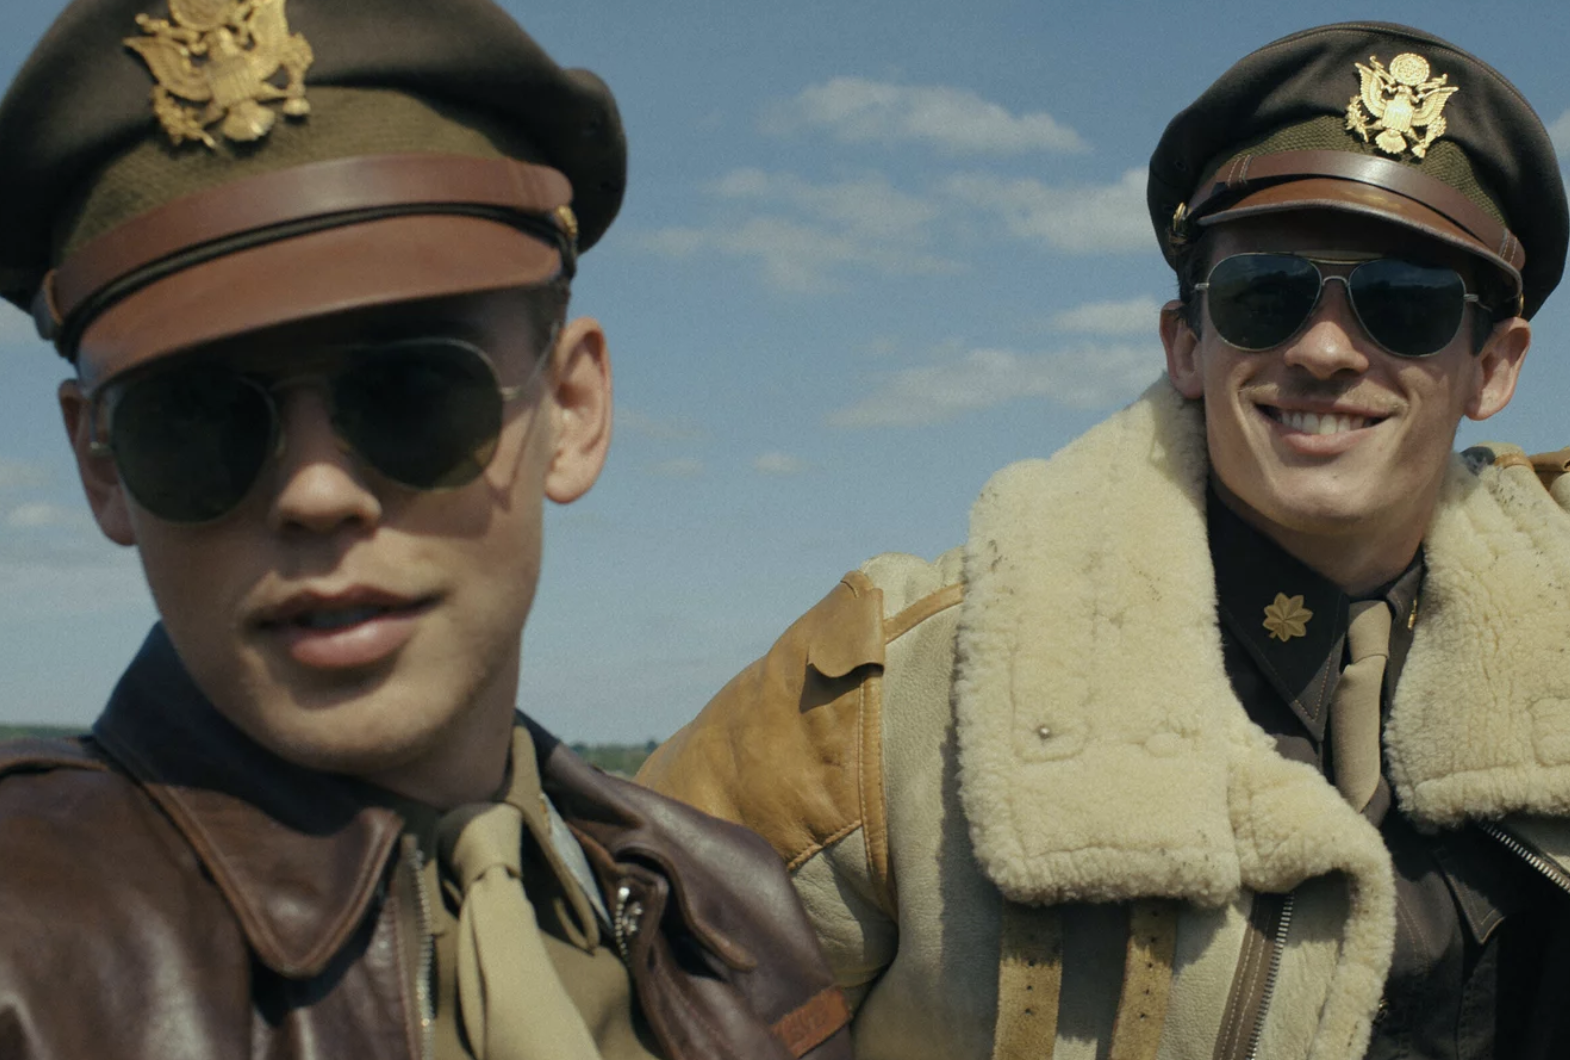 Close up of two 1940s-era pilots stand on the tarmac under blue skies.